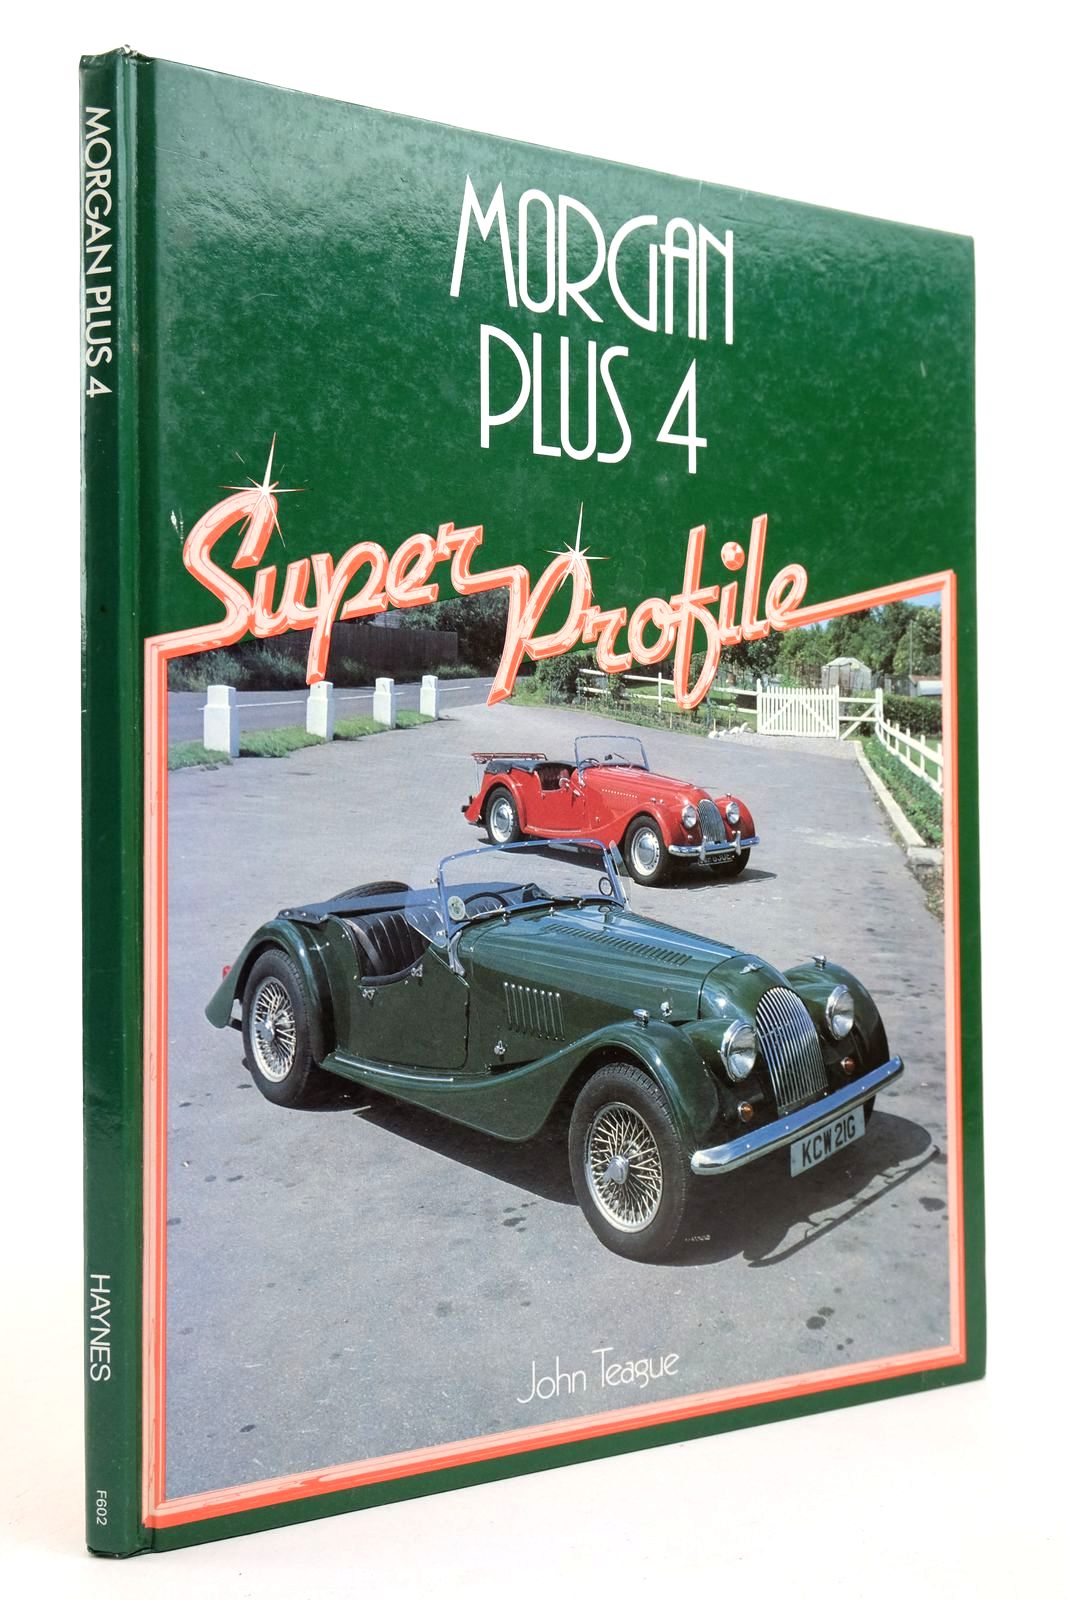 Photo of MORGAN PLUS 4 (SUPER PROFILE) written by Teague, John published by Foulis, Haynes (STOCK CODE: 2140281)  for sale by Stella & Rose's Books